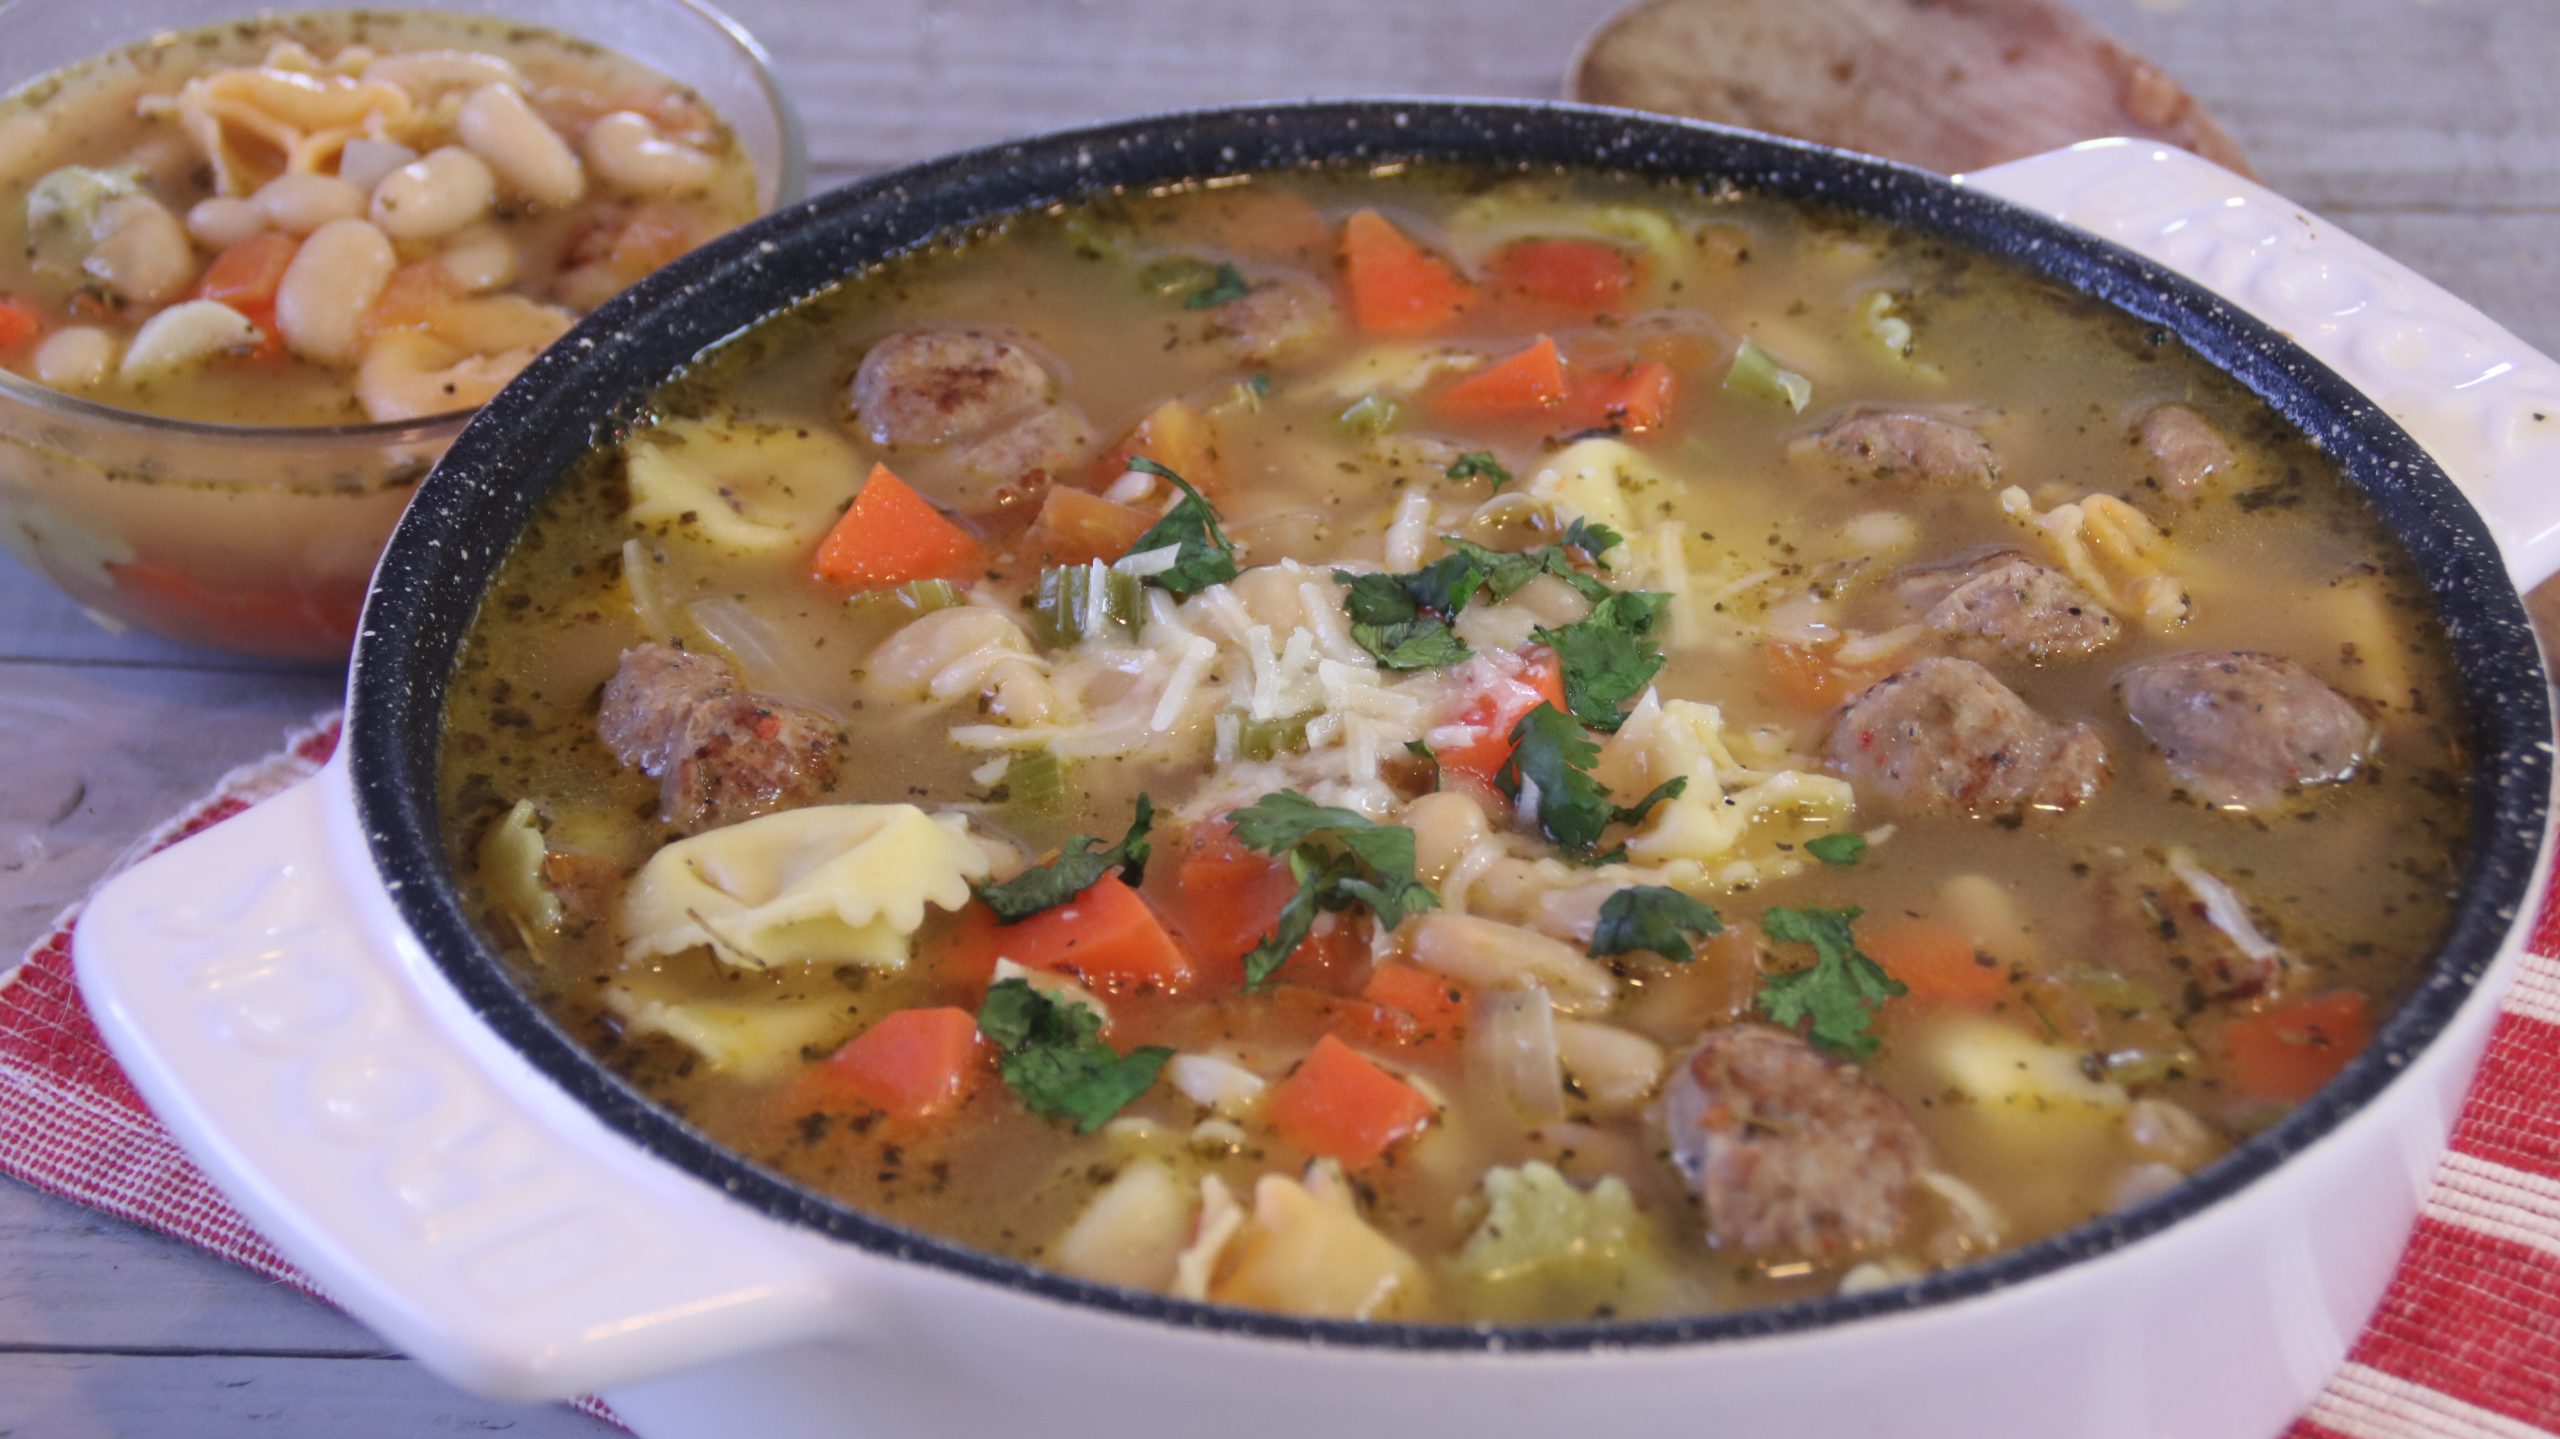 Sausage and tortellini soup